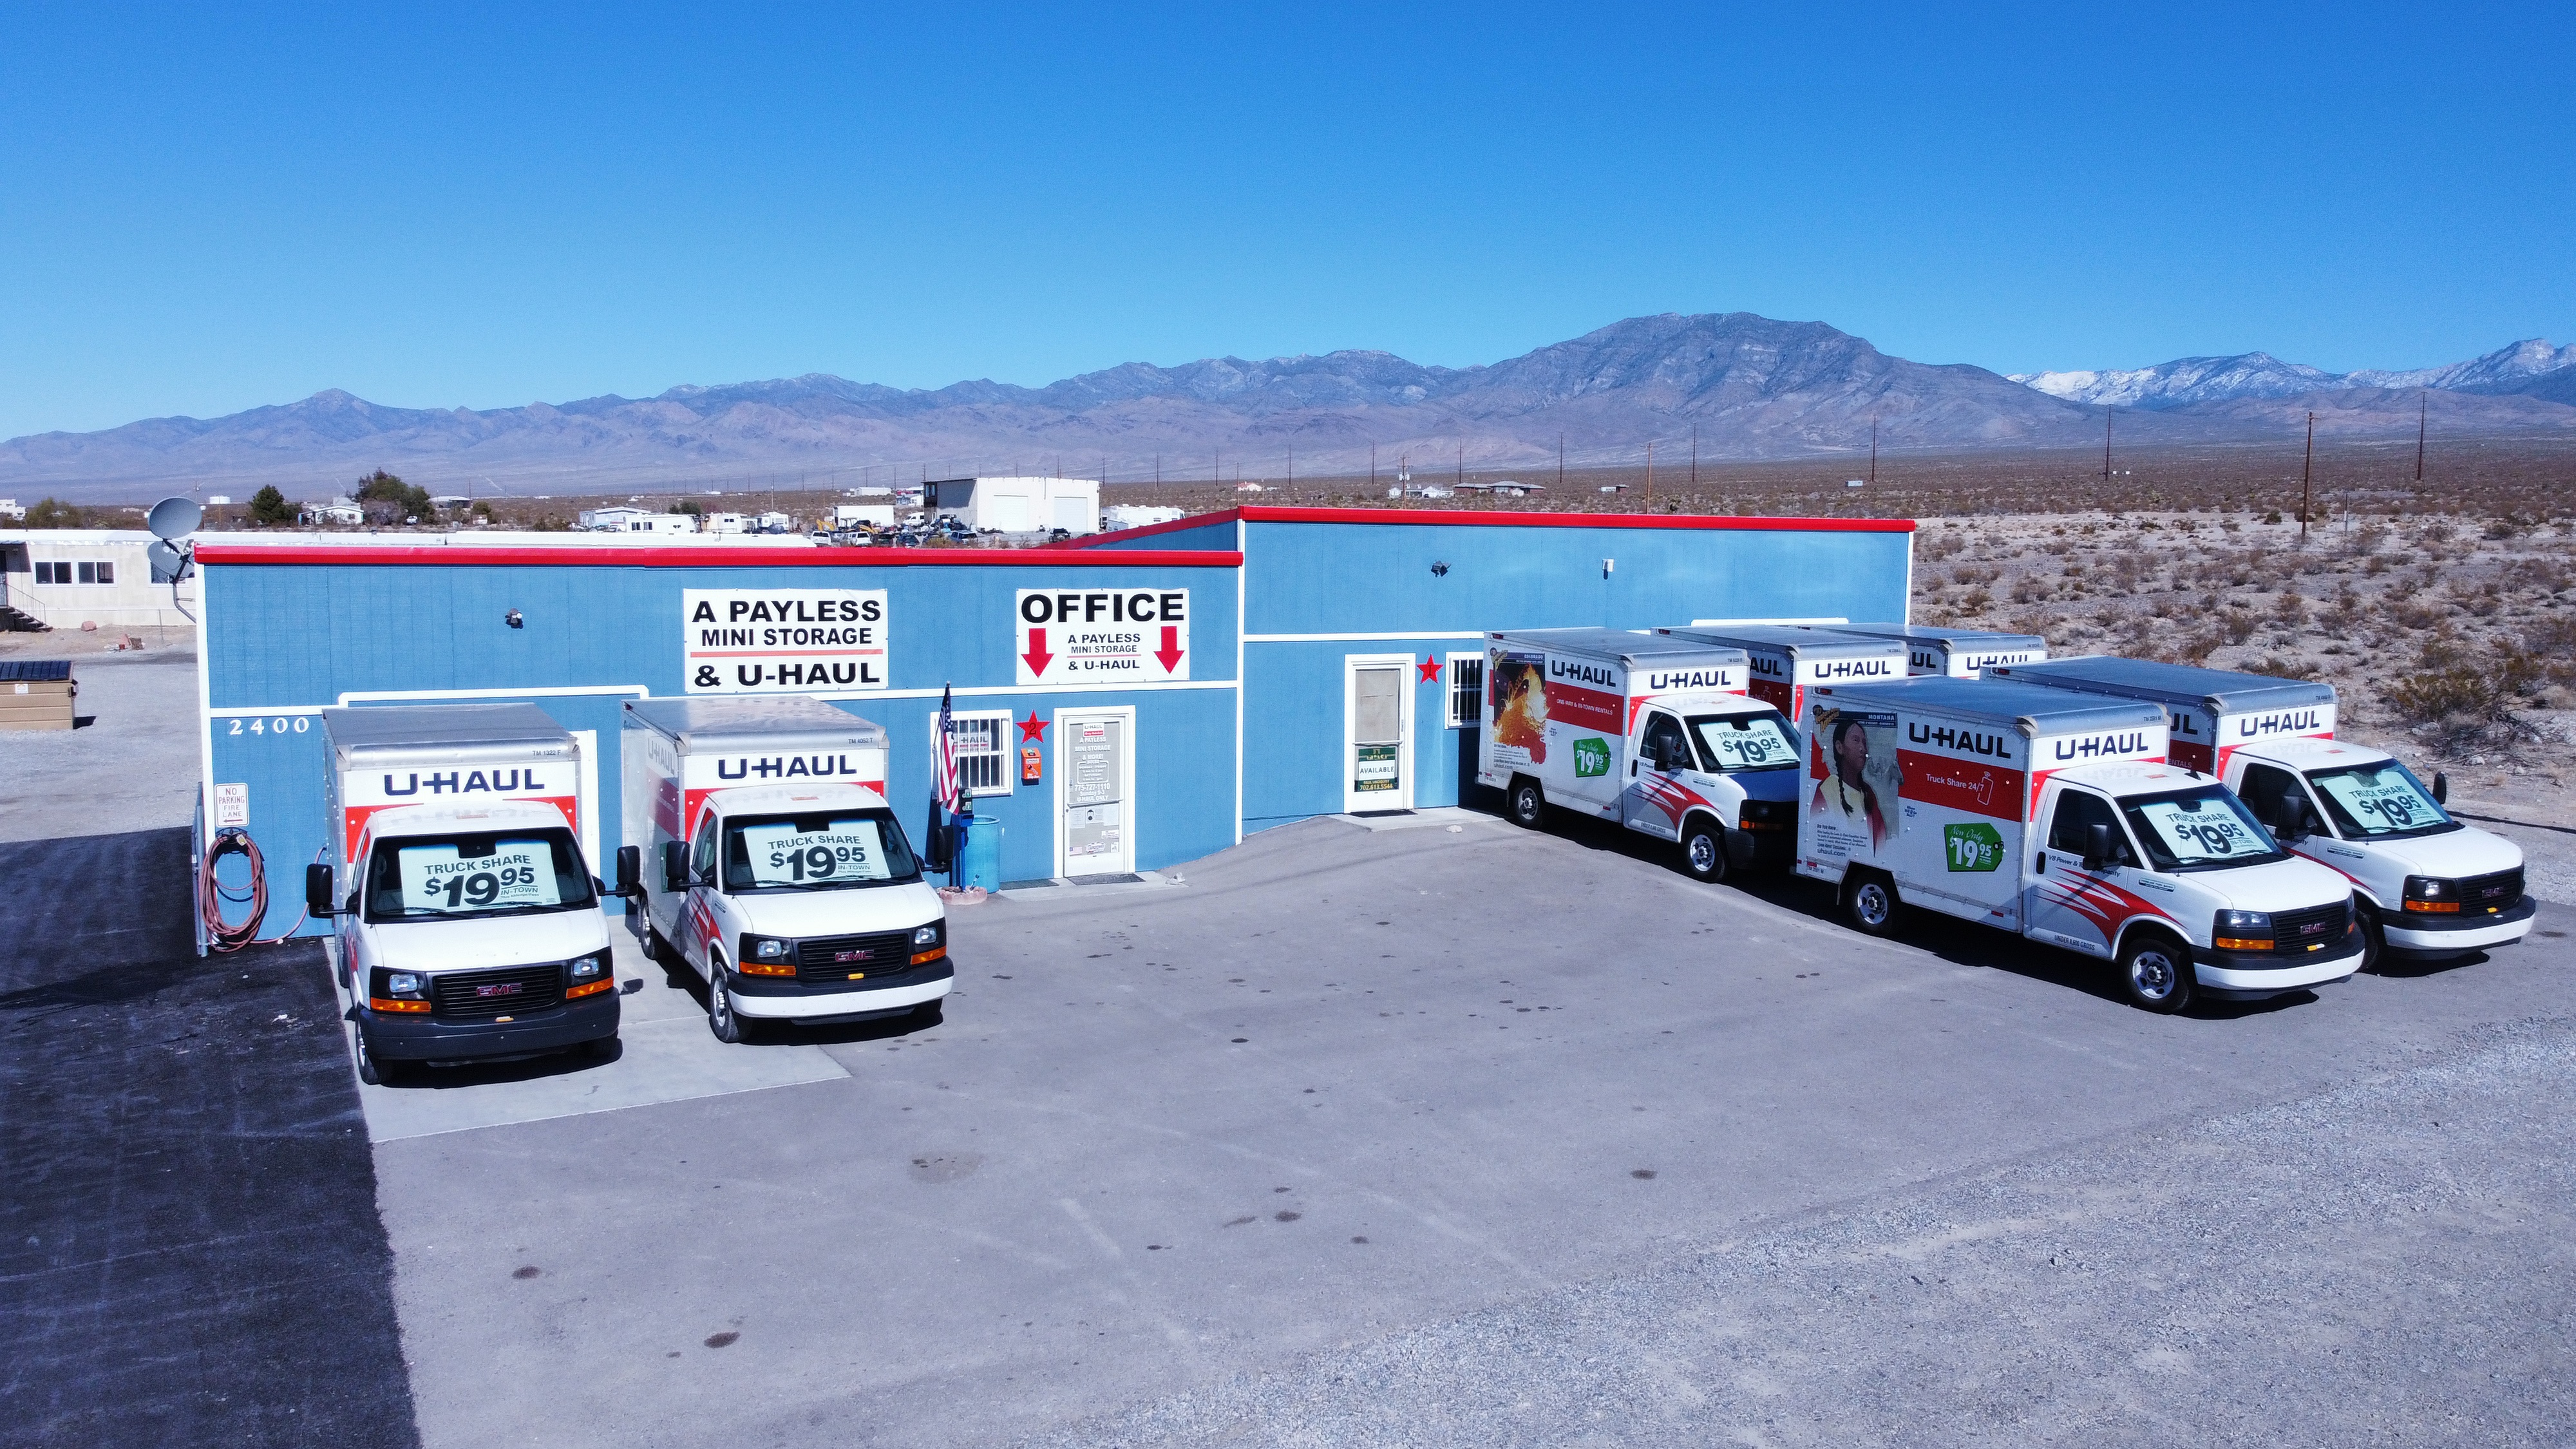 uhaul rentals available here